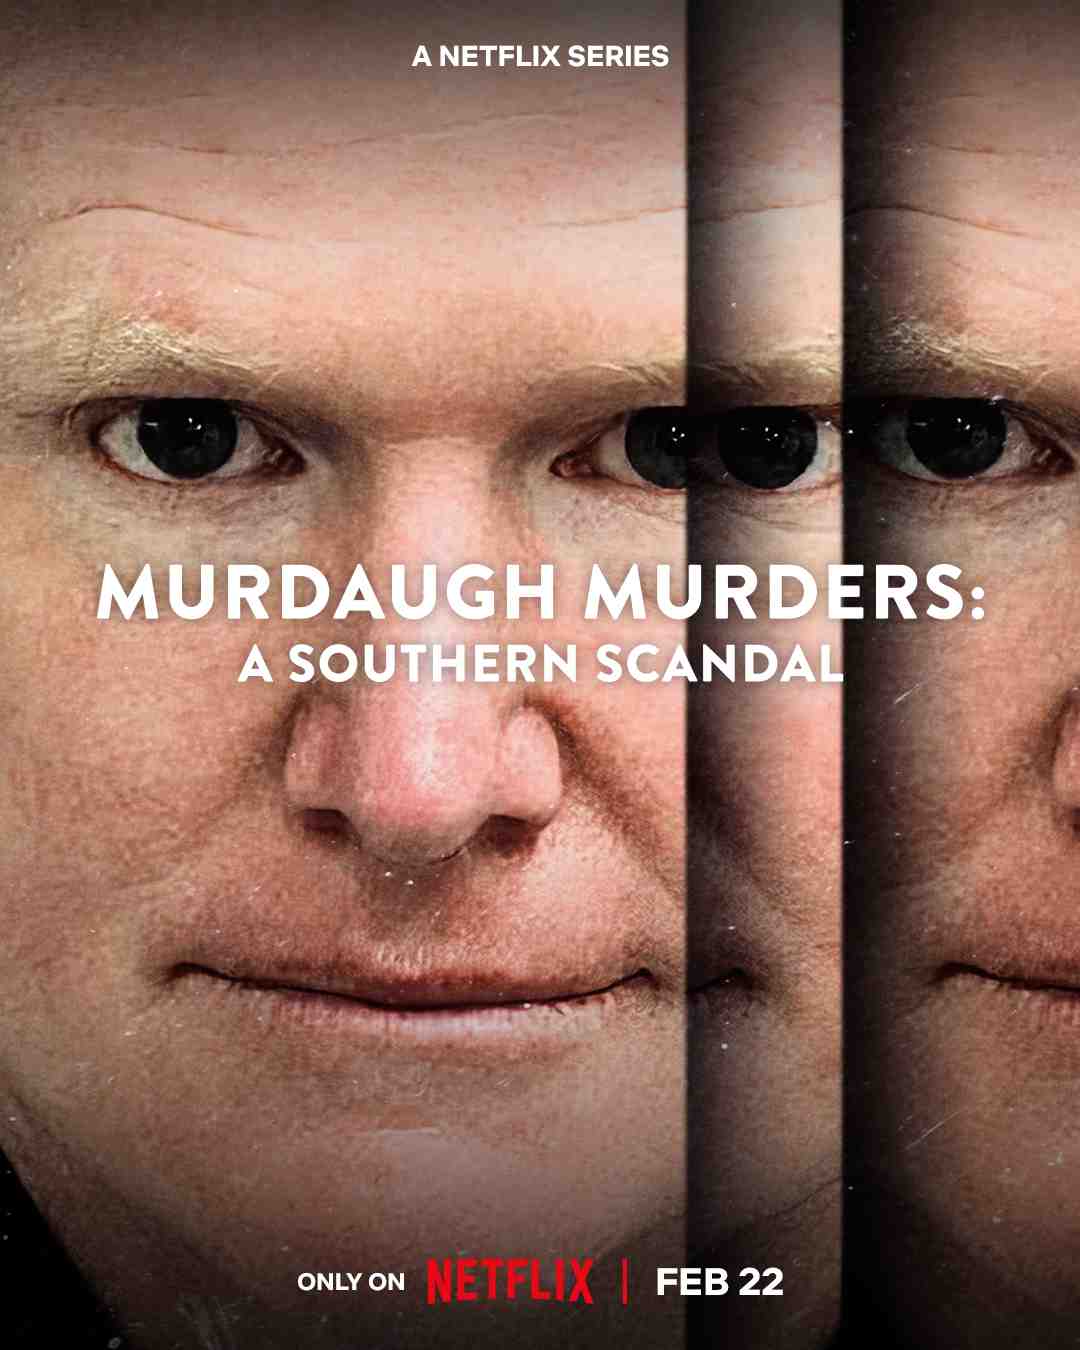 Couch detective or rookie sleuth, we've got your bingeworthy fix. Unearth the eldritch, eerie, and utterly captivating best true crime documentaries to stream. Bear witness to humanity's darkest sides.